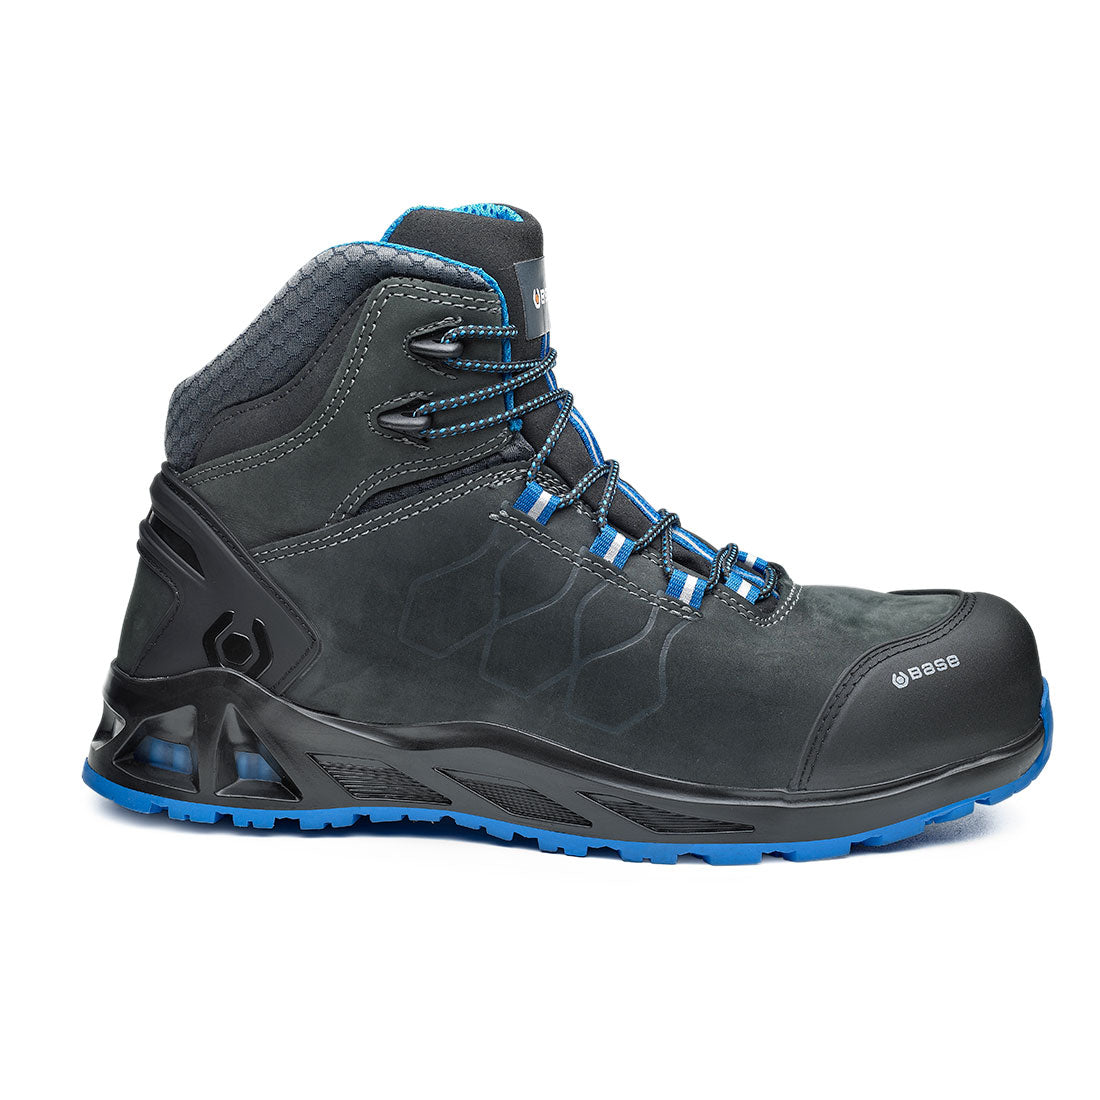 Base K-Road Top Safety Boots S3 HRO CI SRC